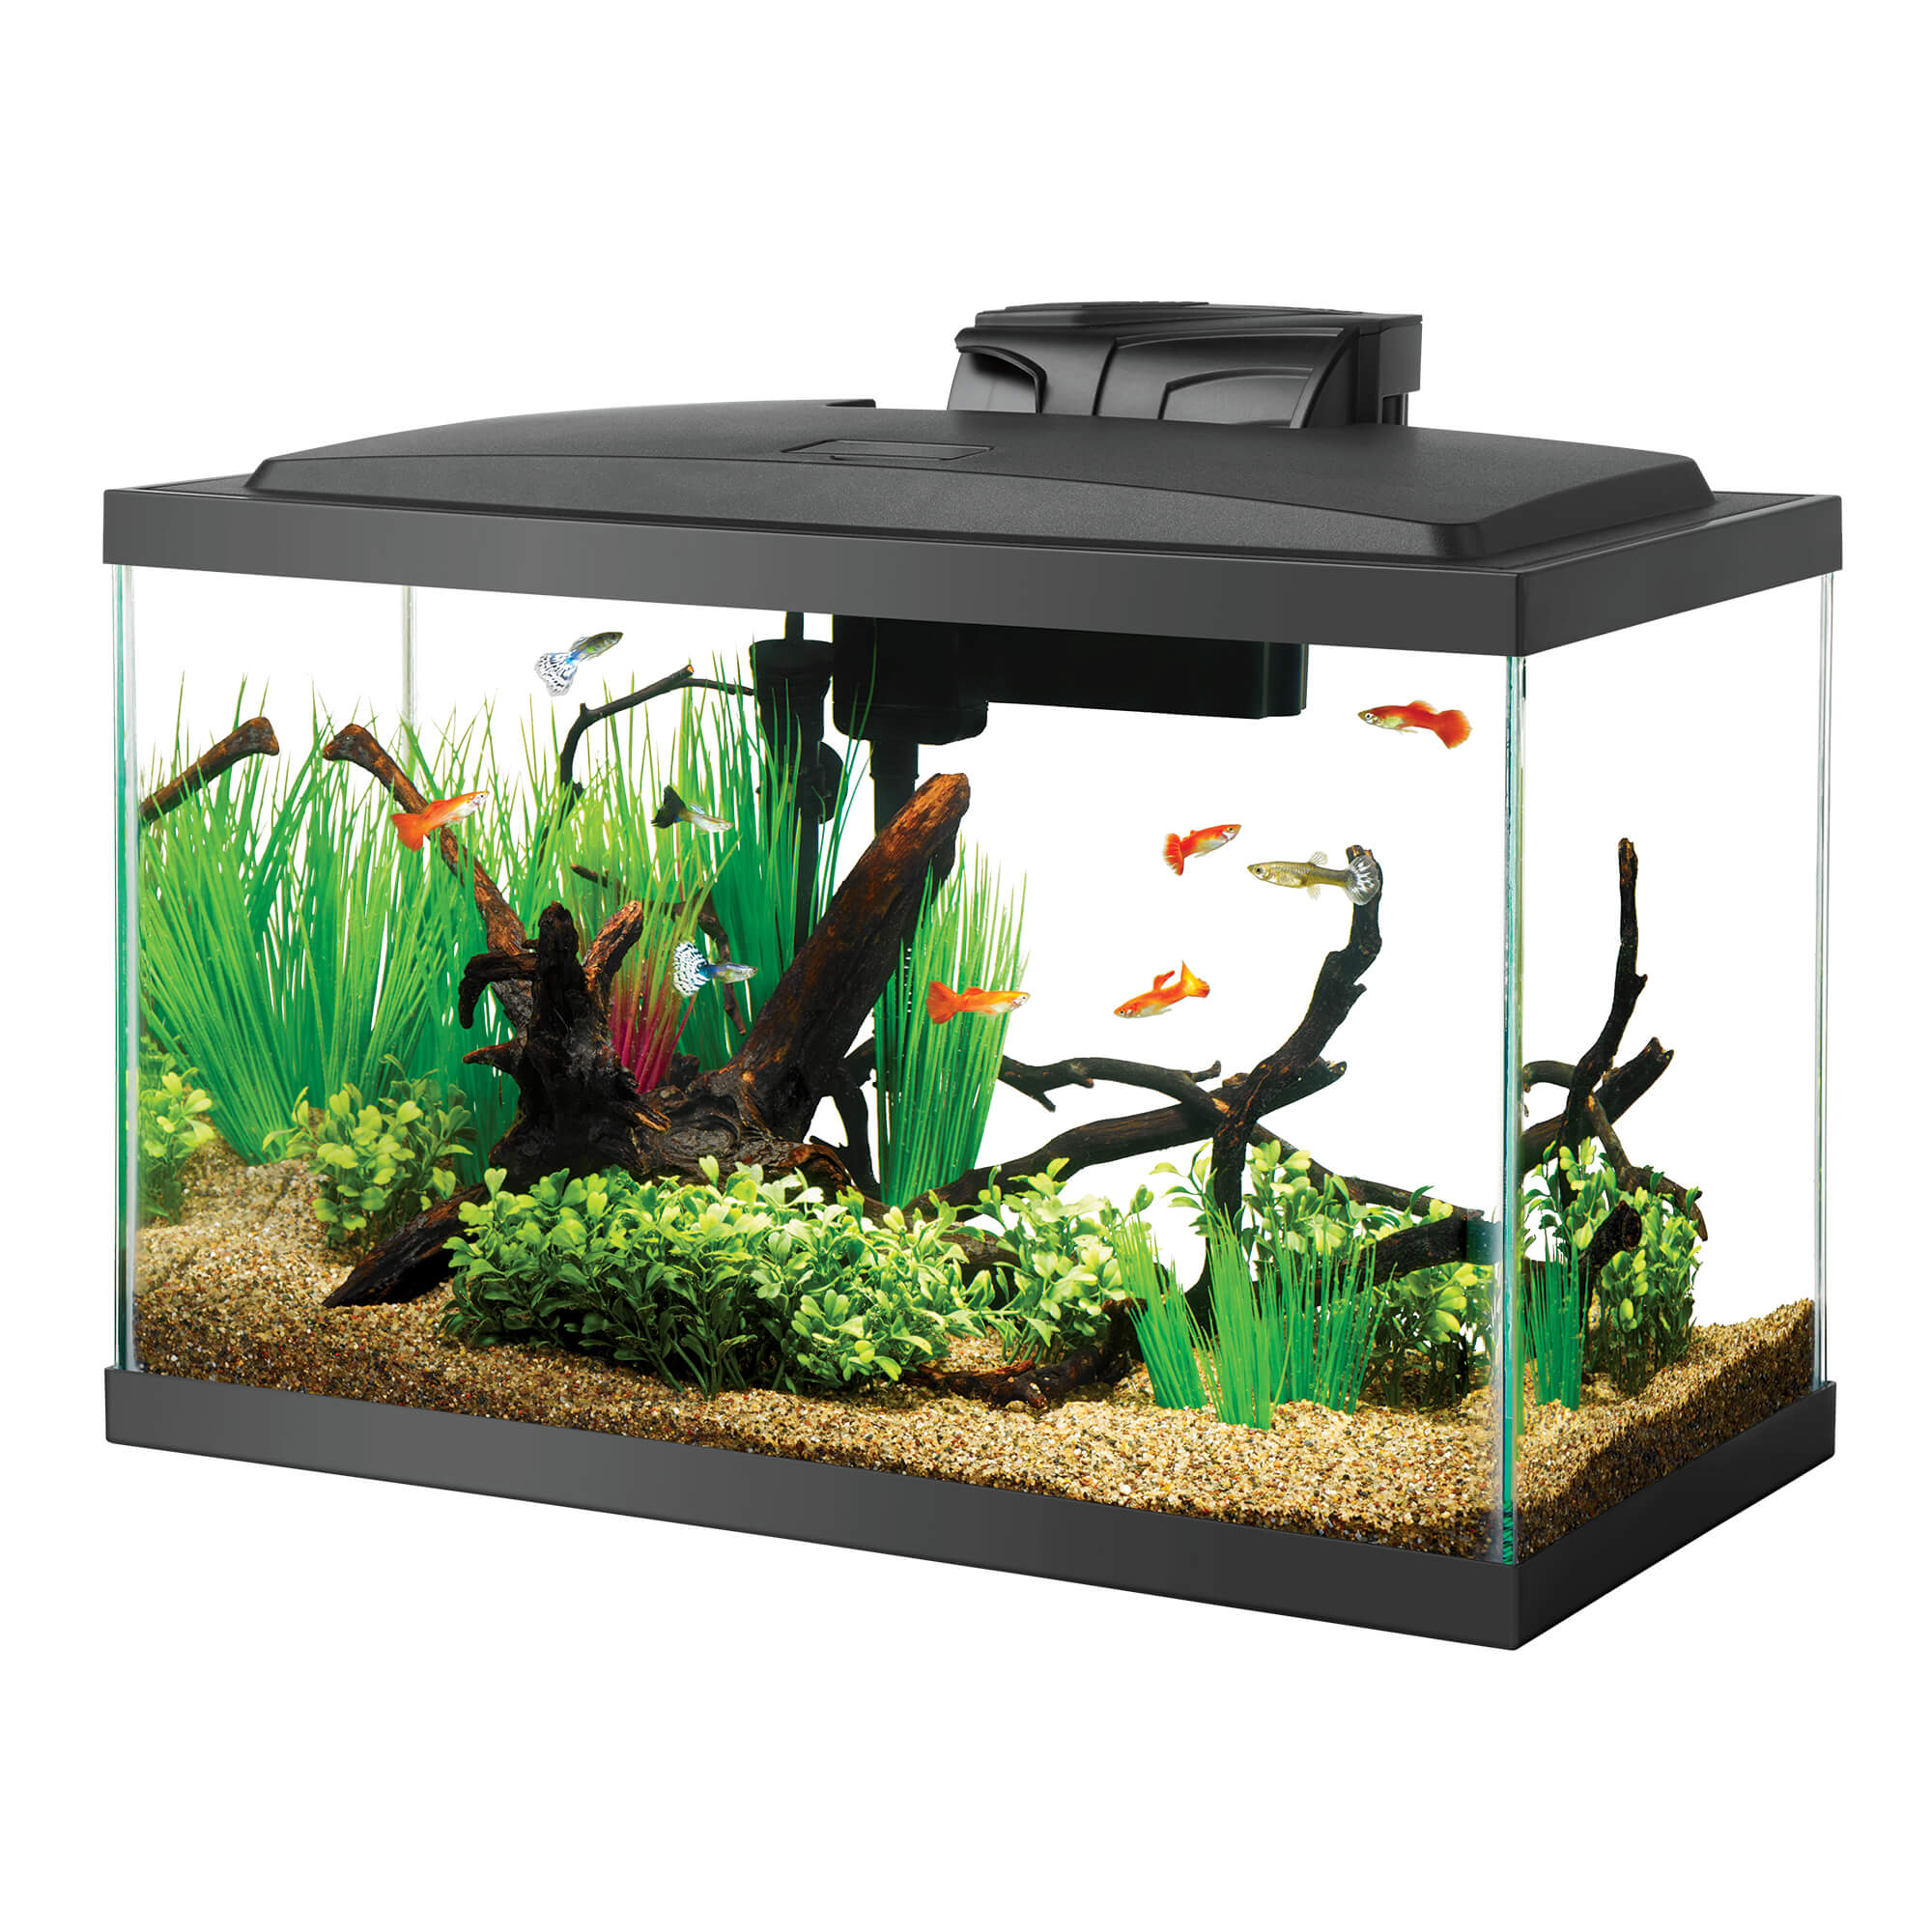 Which is the Best Fish Tank to Buy? - Discount Leisure Products